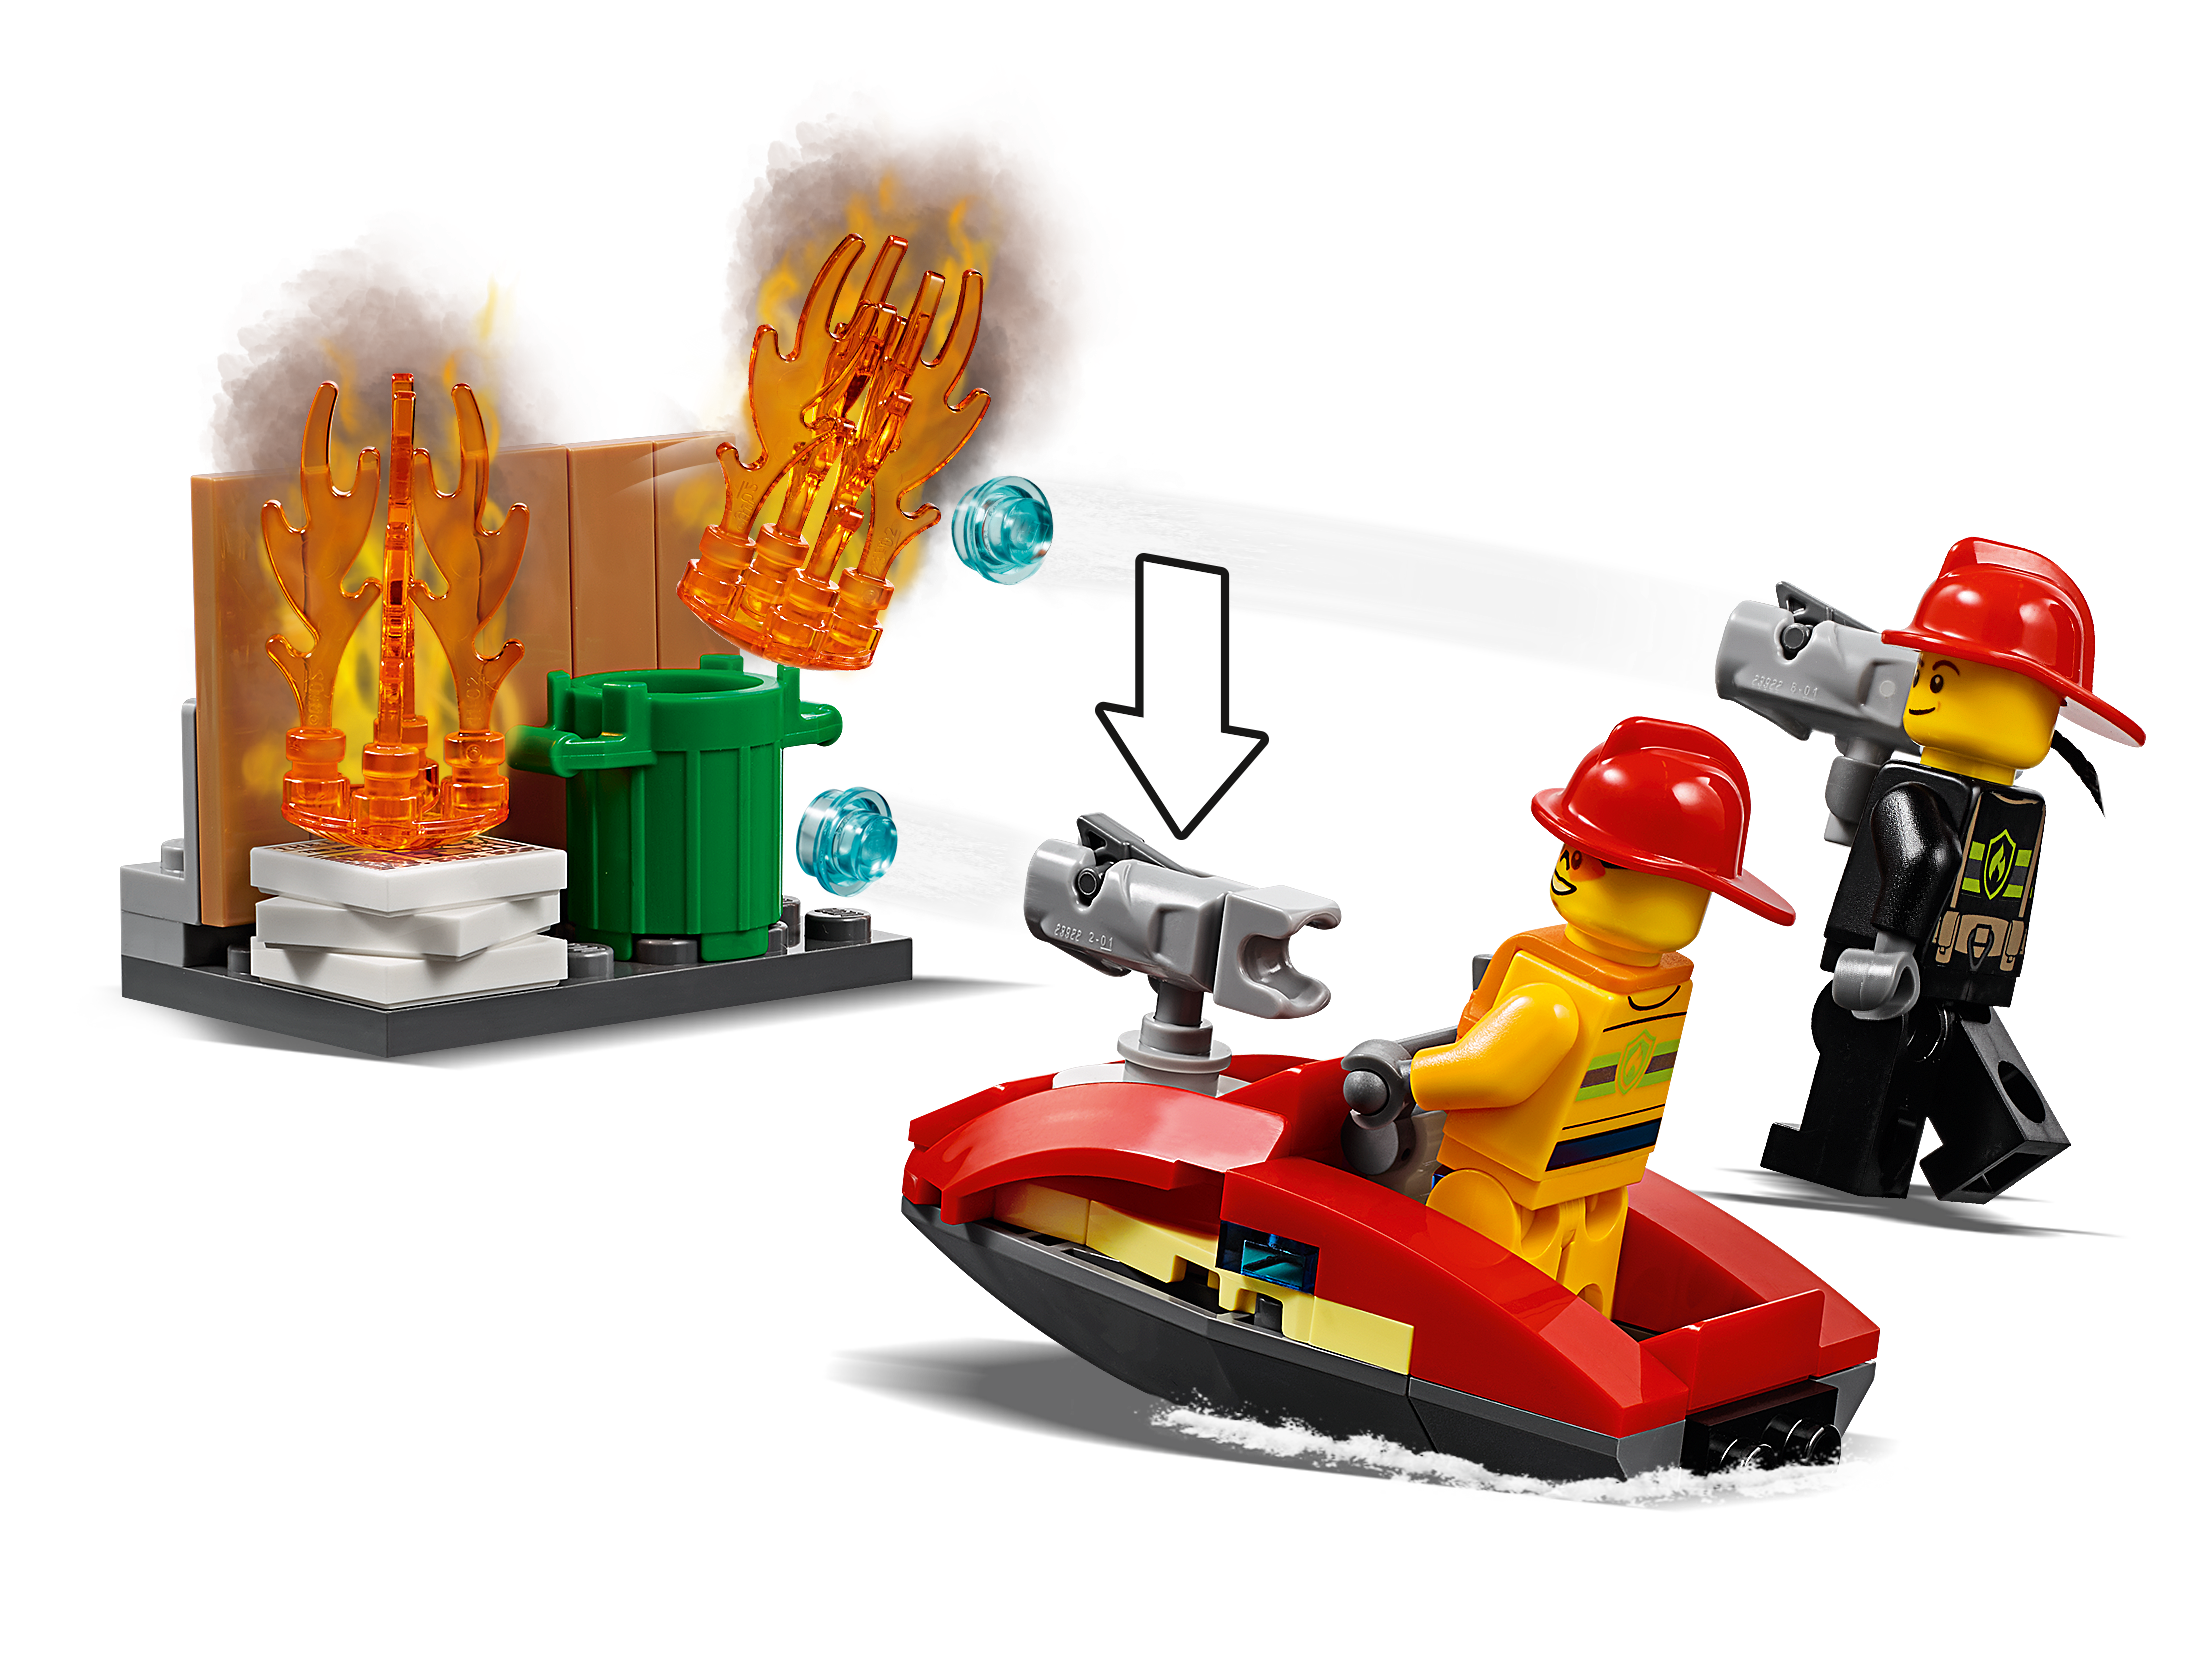 60215 for sale online LEGO Fire Station City Fire 